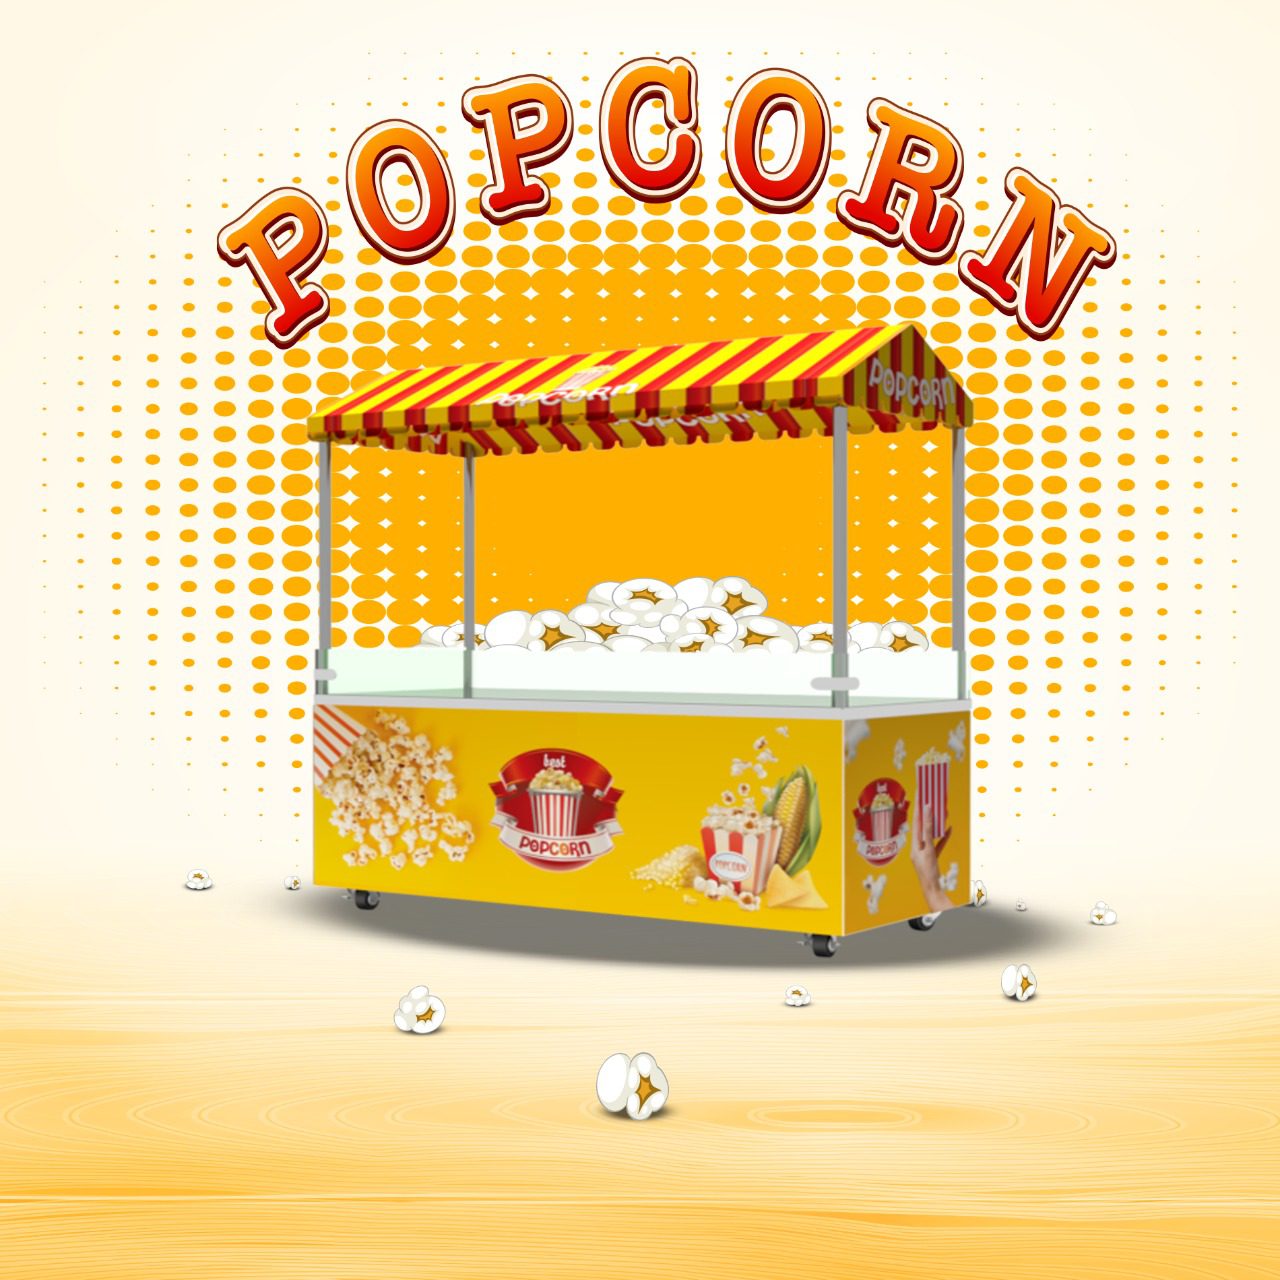 Your guide to popcorn machines